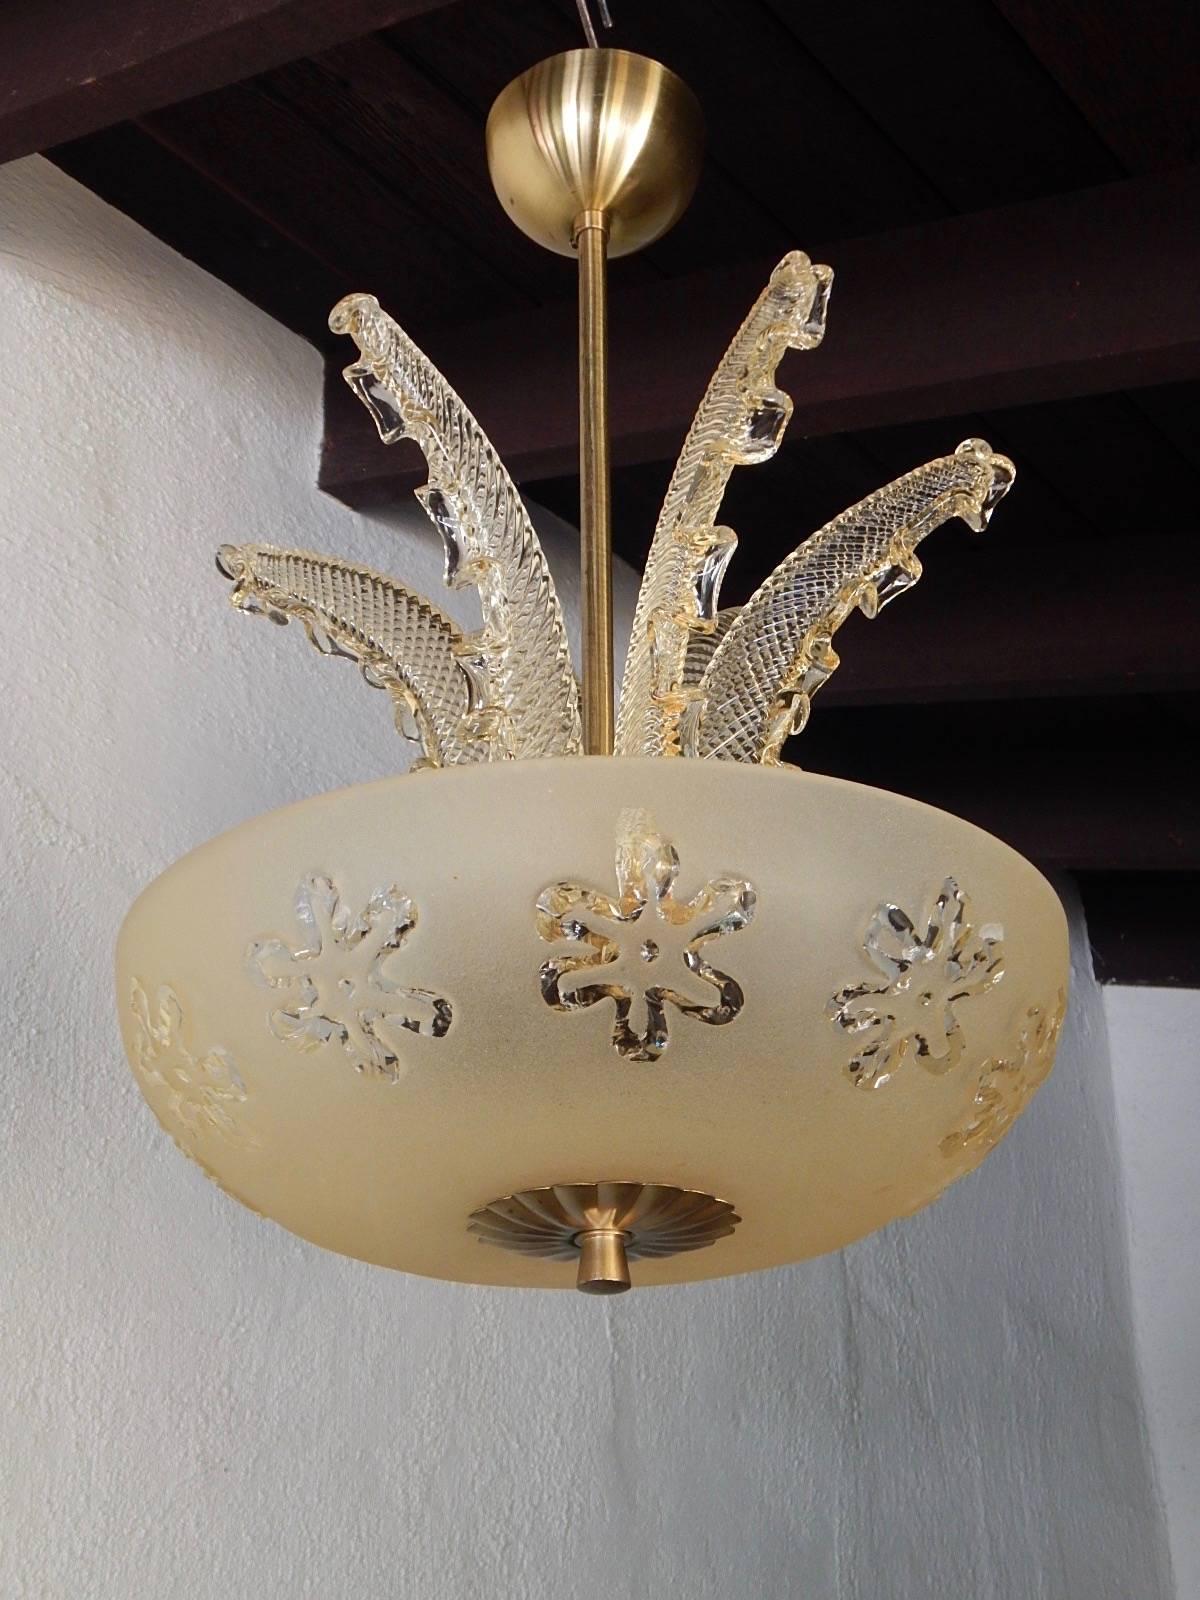 Swedish mid-20th century hanging fixture with six glass leaves. Price includes rewiring. Fixture is in excellent original condition.